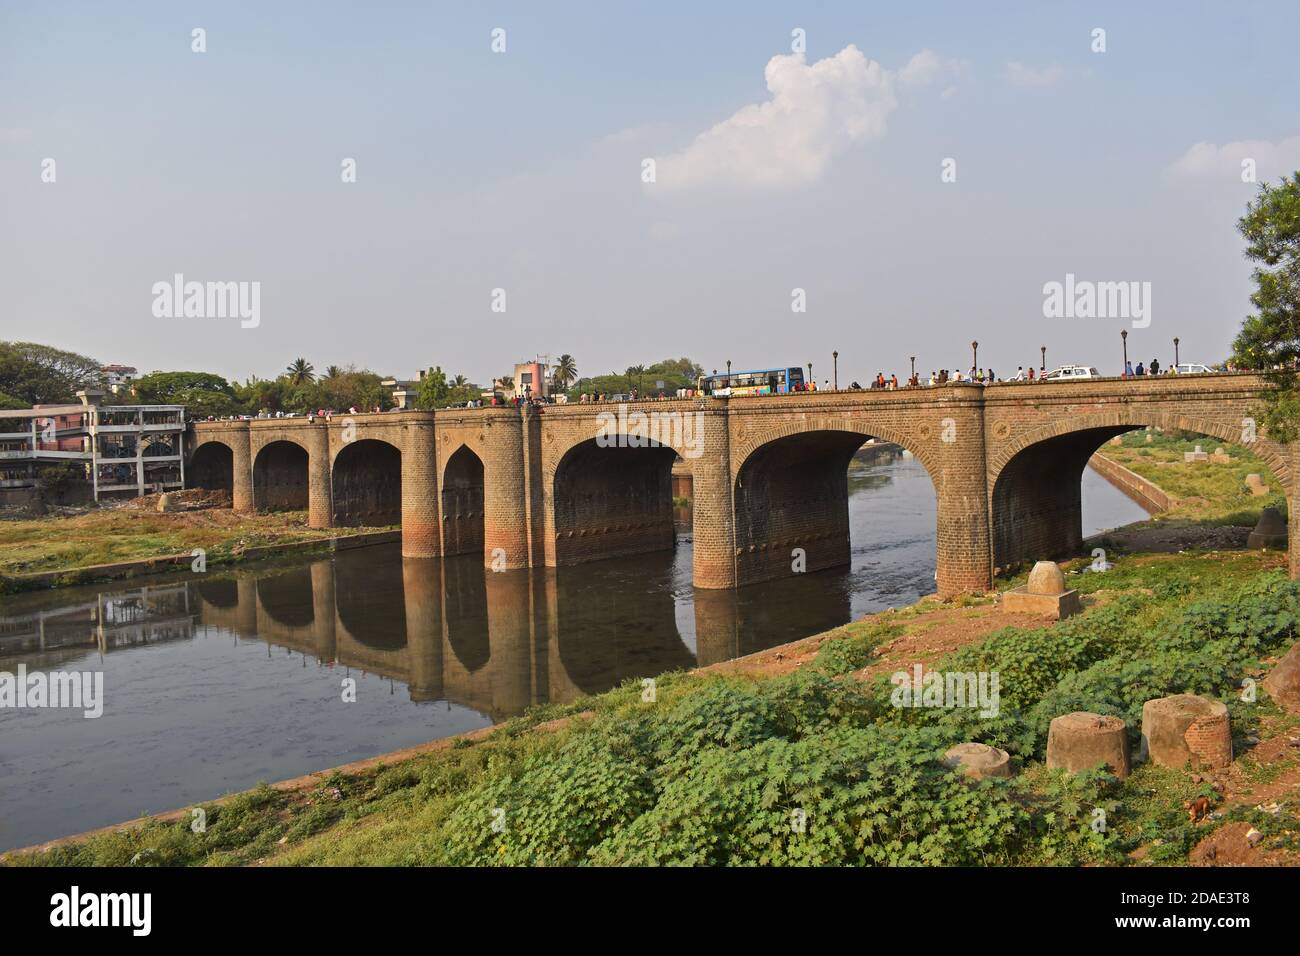 Chhatrapati Shivaji Bridge - Pune Heritage - link connecting the two banks of the river, link between the old city and the new city. Pune, Maharashtra Stock Photo